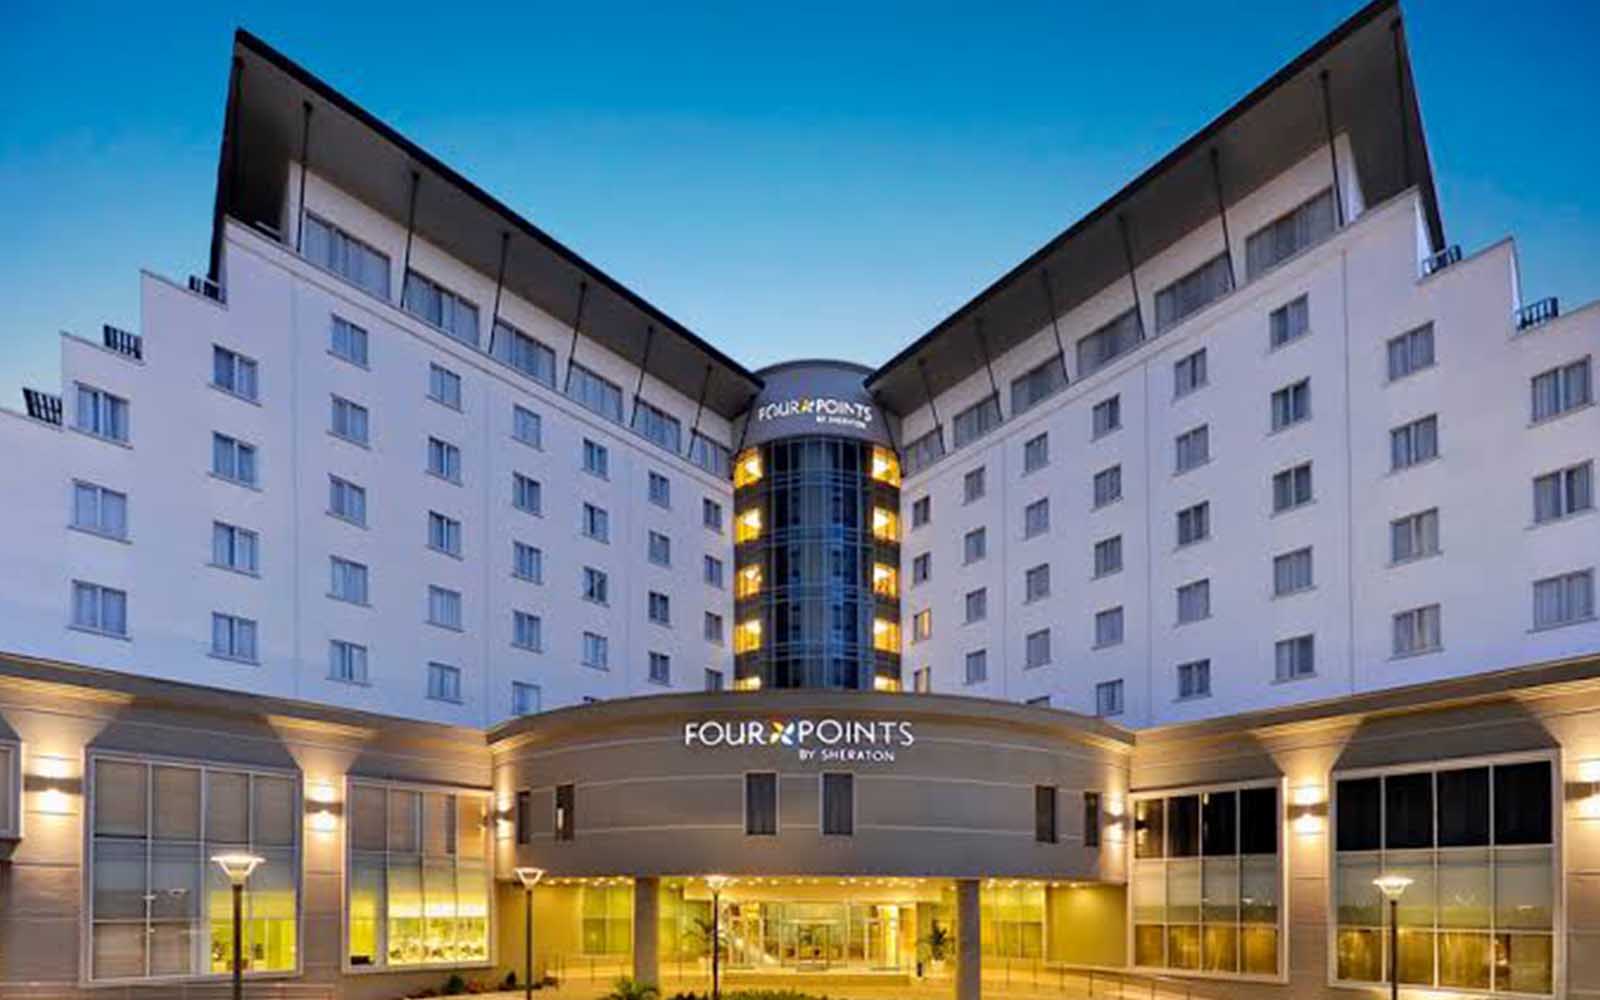 Actis and Westmont acquire Four Points by Sheraton - Nairametrics